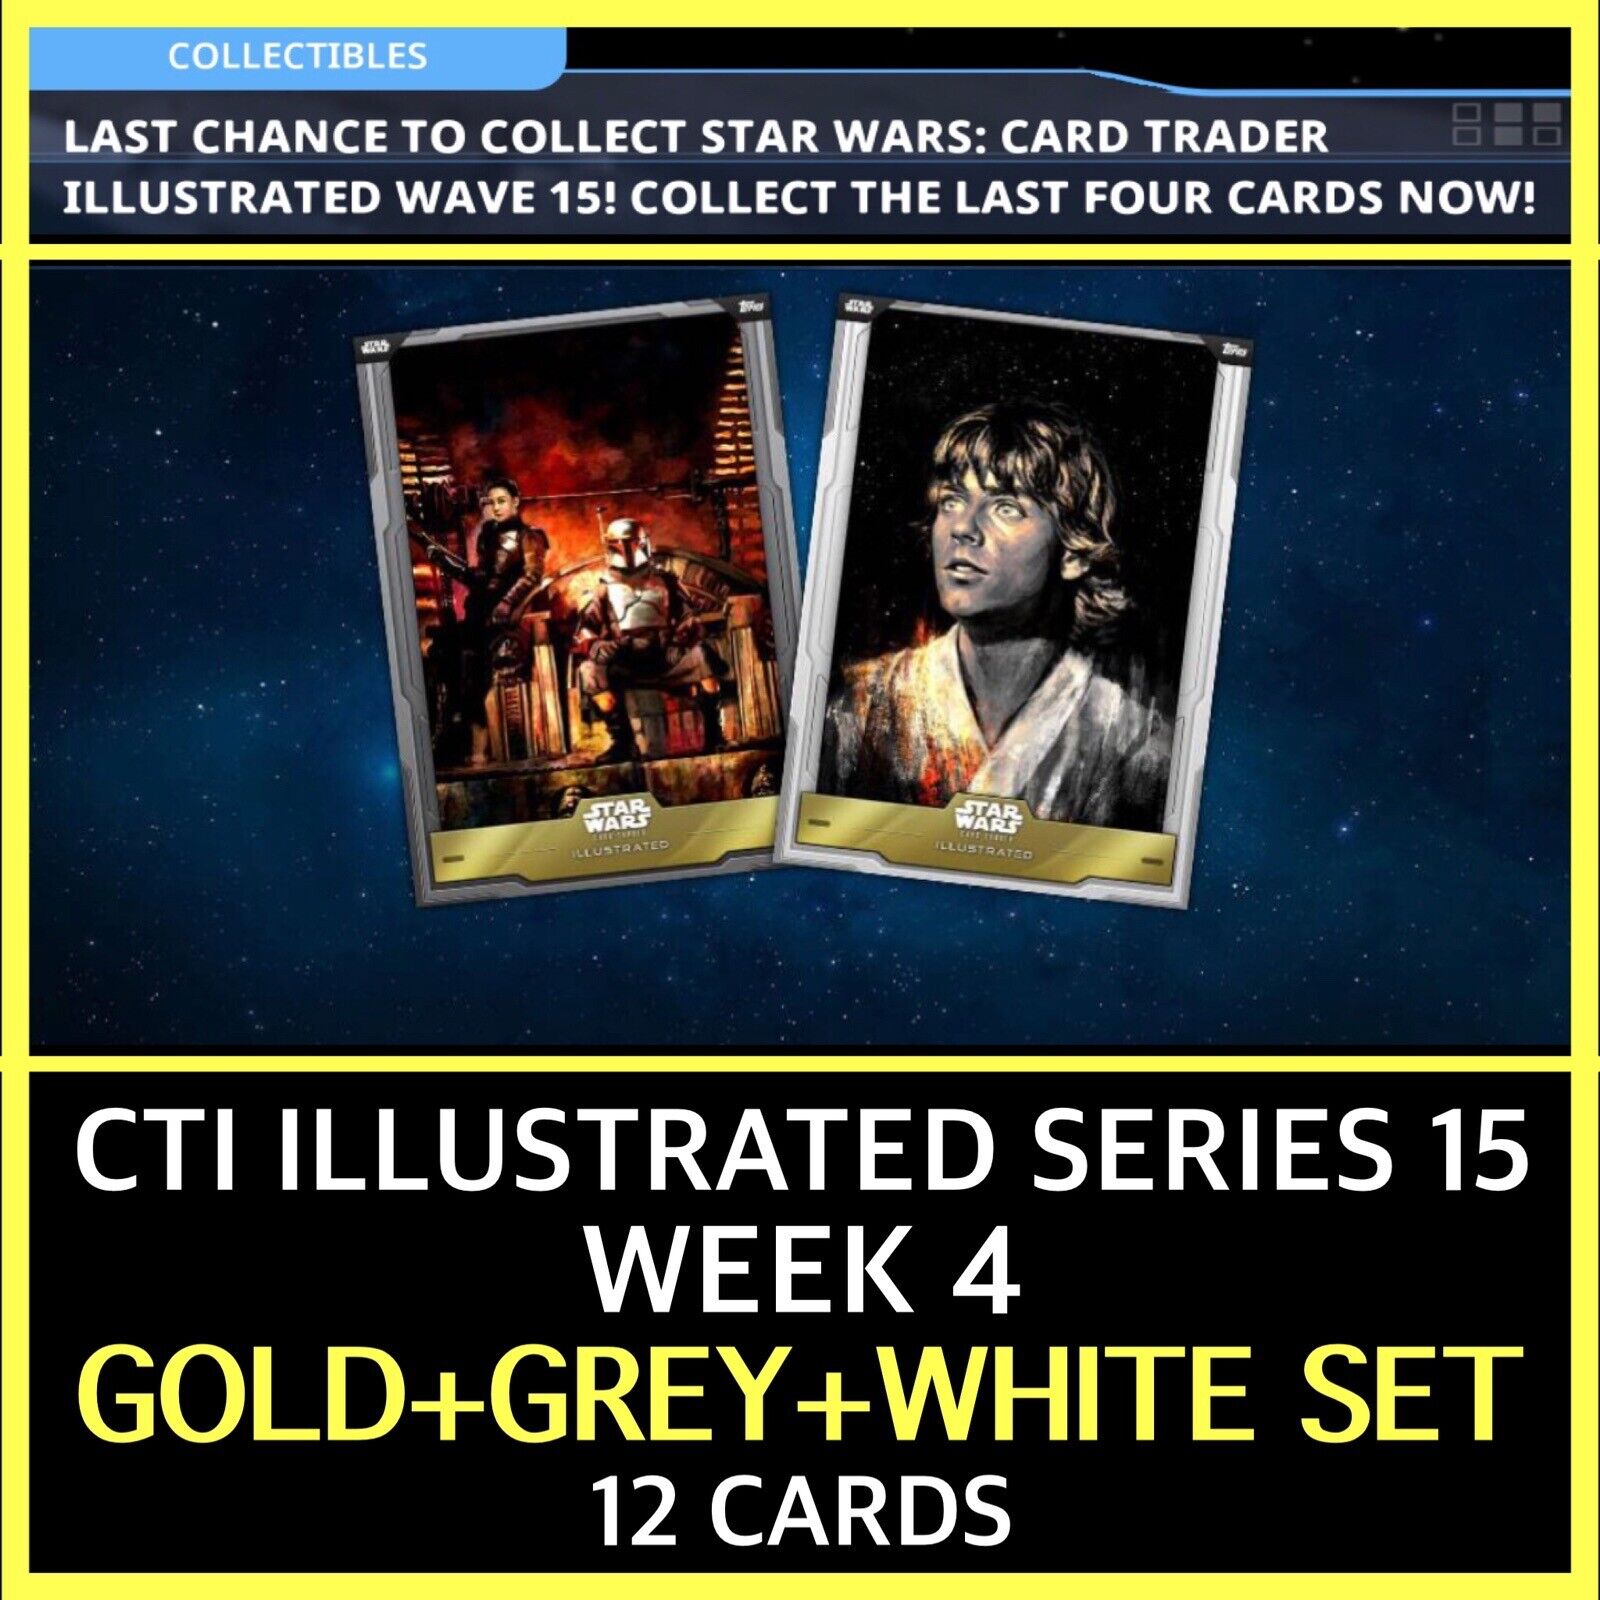 WAVE 15 WEEK 4 CTI ILLUSTRATED-GOLD+GREY+WH 12 CARDS-TOPPS STAR WARS CARD TRADER